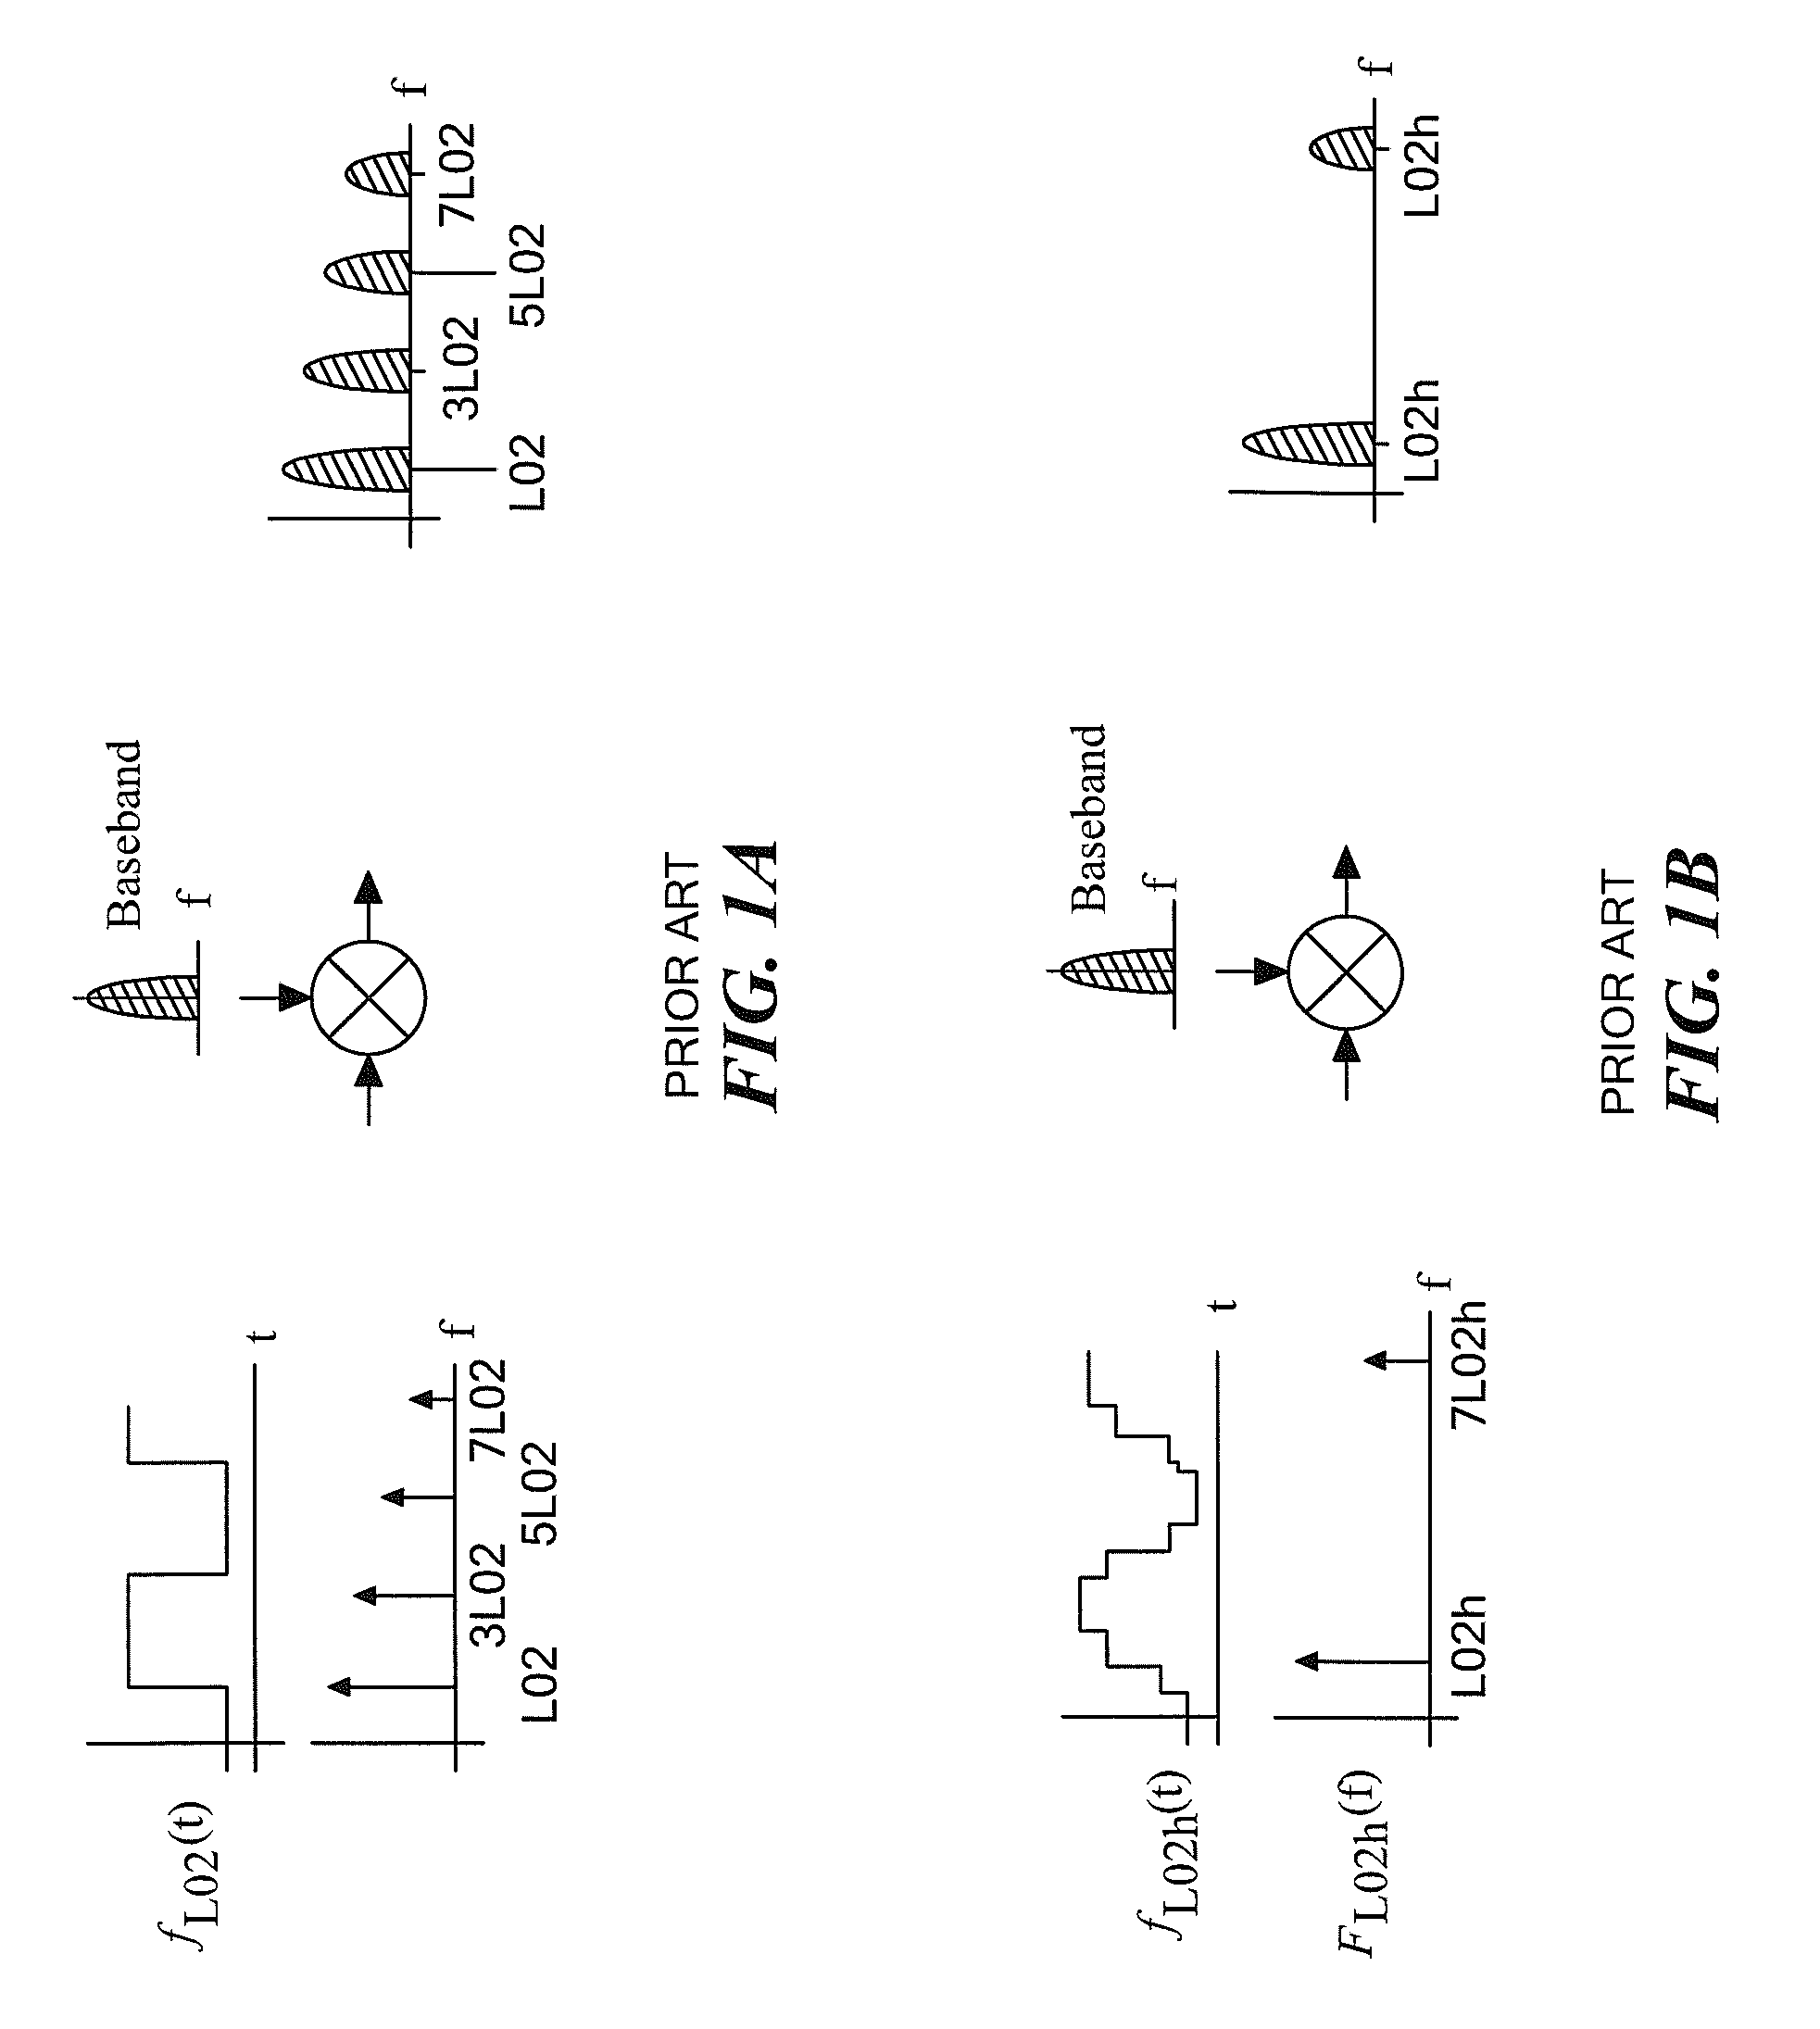 Harmonic reject mixer with active phase mismatch compensation in the local oscillator path